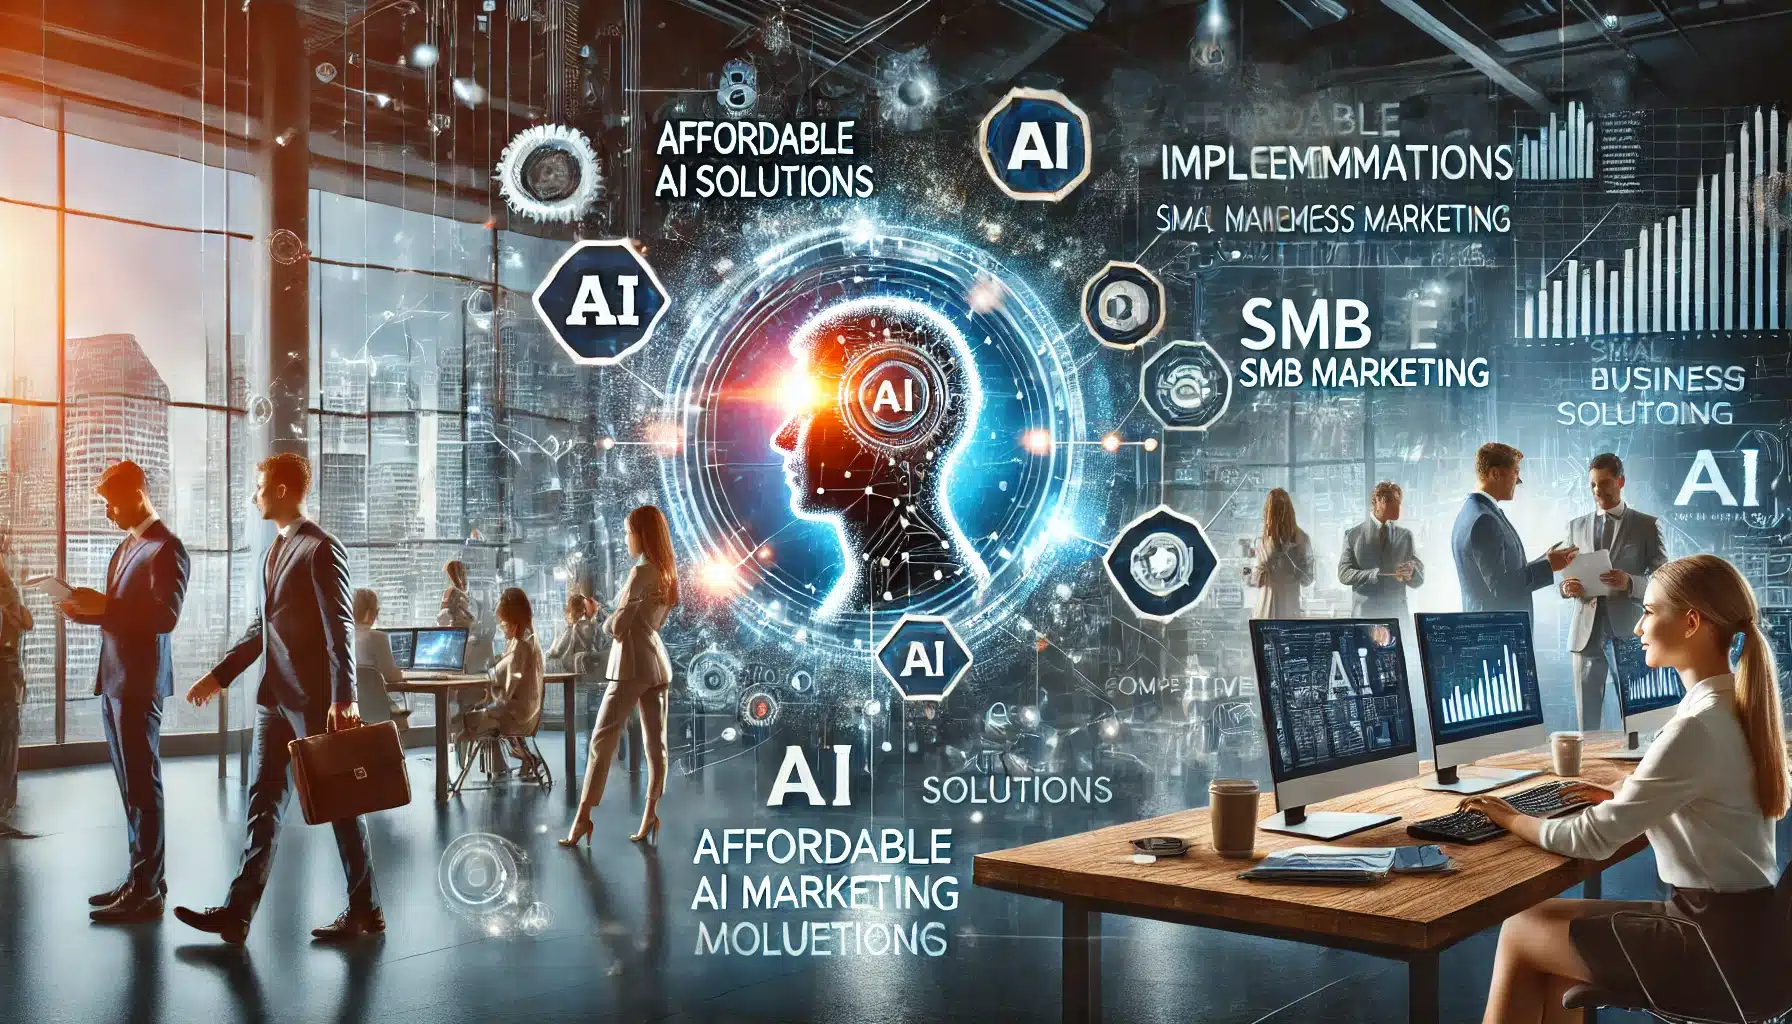 A modern and dynamic scene depicting AI implementation in small business marketing.